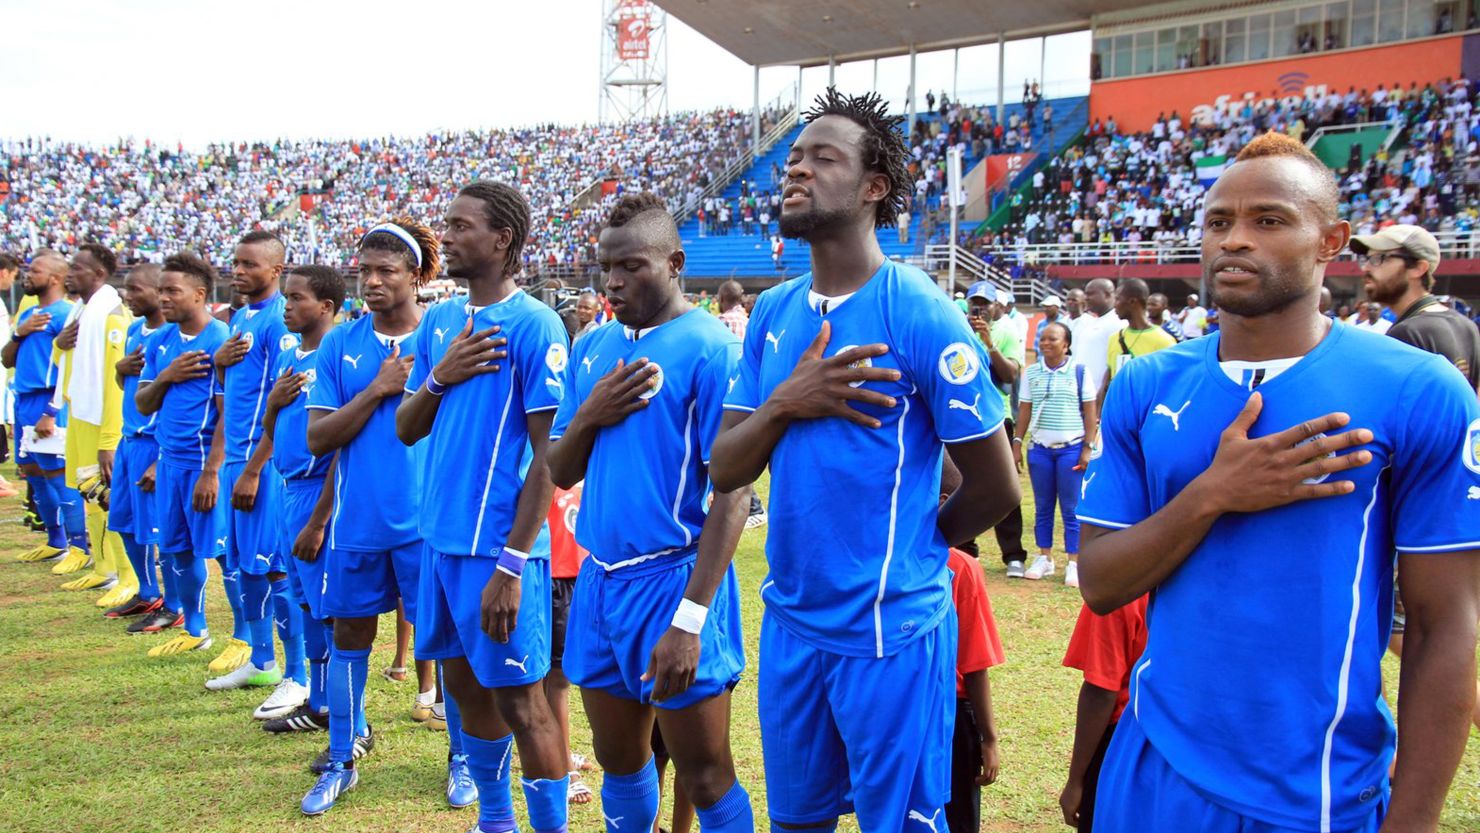 The Sierra Leone football team line up before a World Cup qualifying match against Tunisia in June 2013.